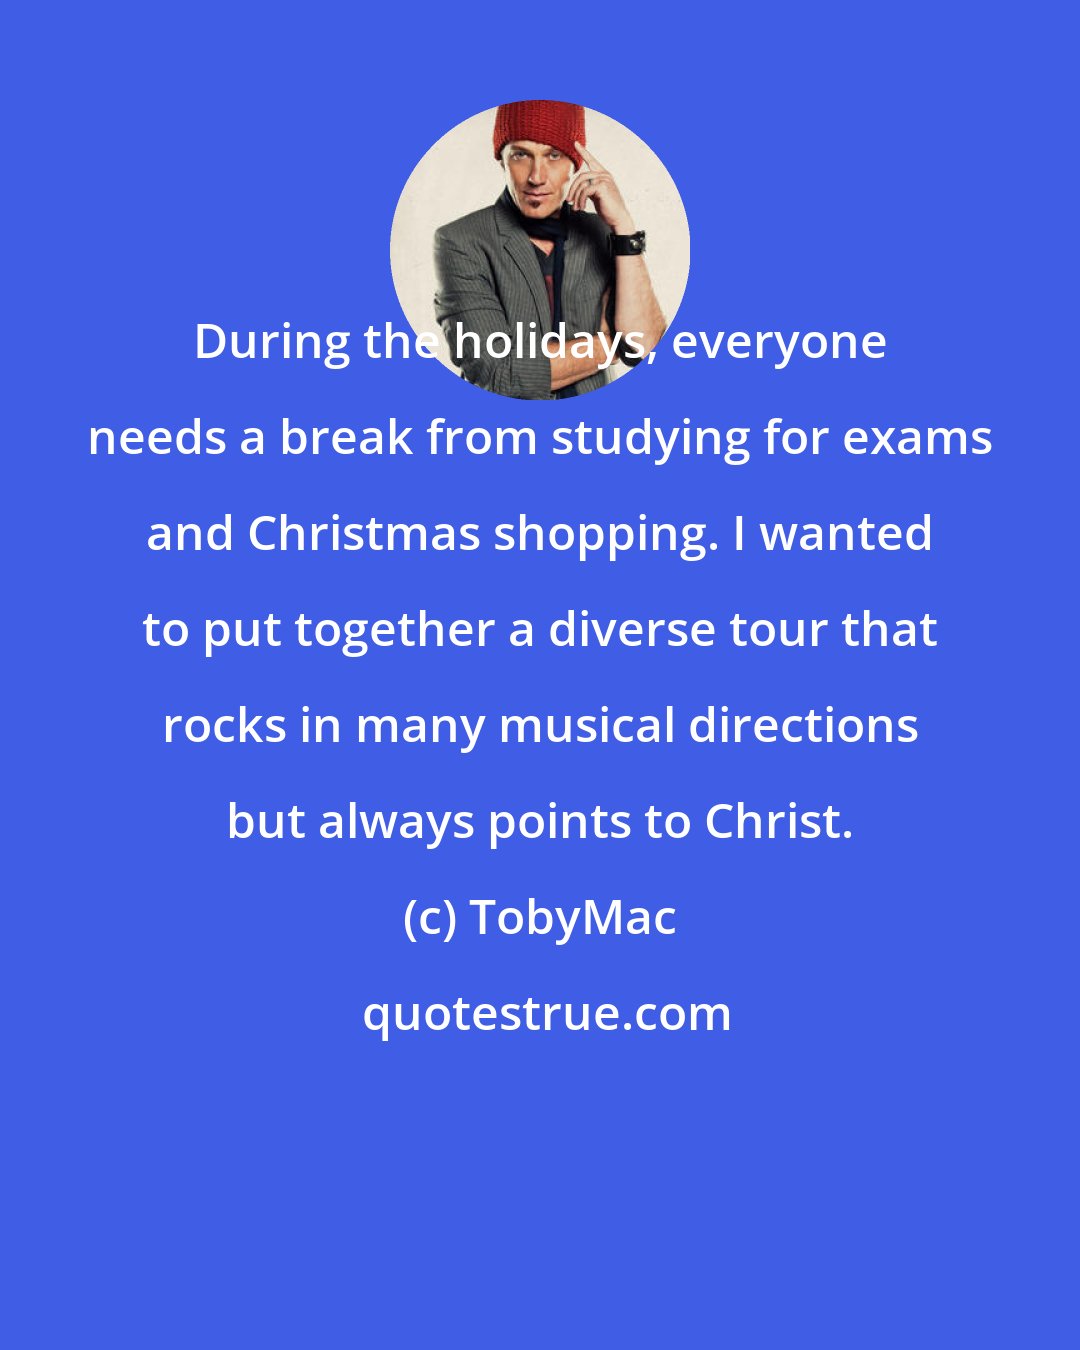 TobyMac: During the holidays, everyone needs a break from studying for exams and Christmas shopping. I wanted to put together a diverse tour that rocks in many musical directions but always points to Christ.